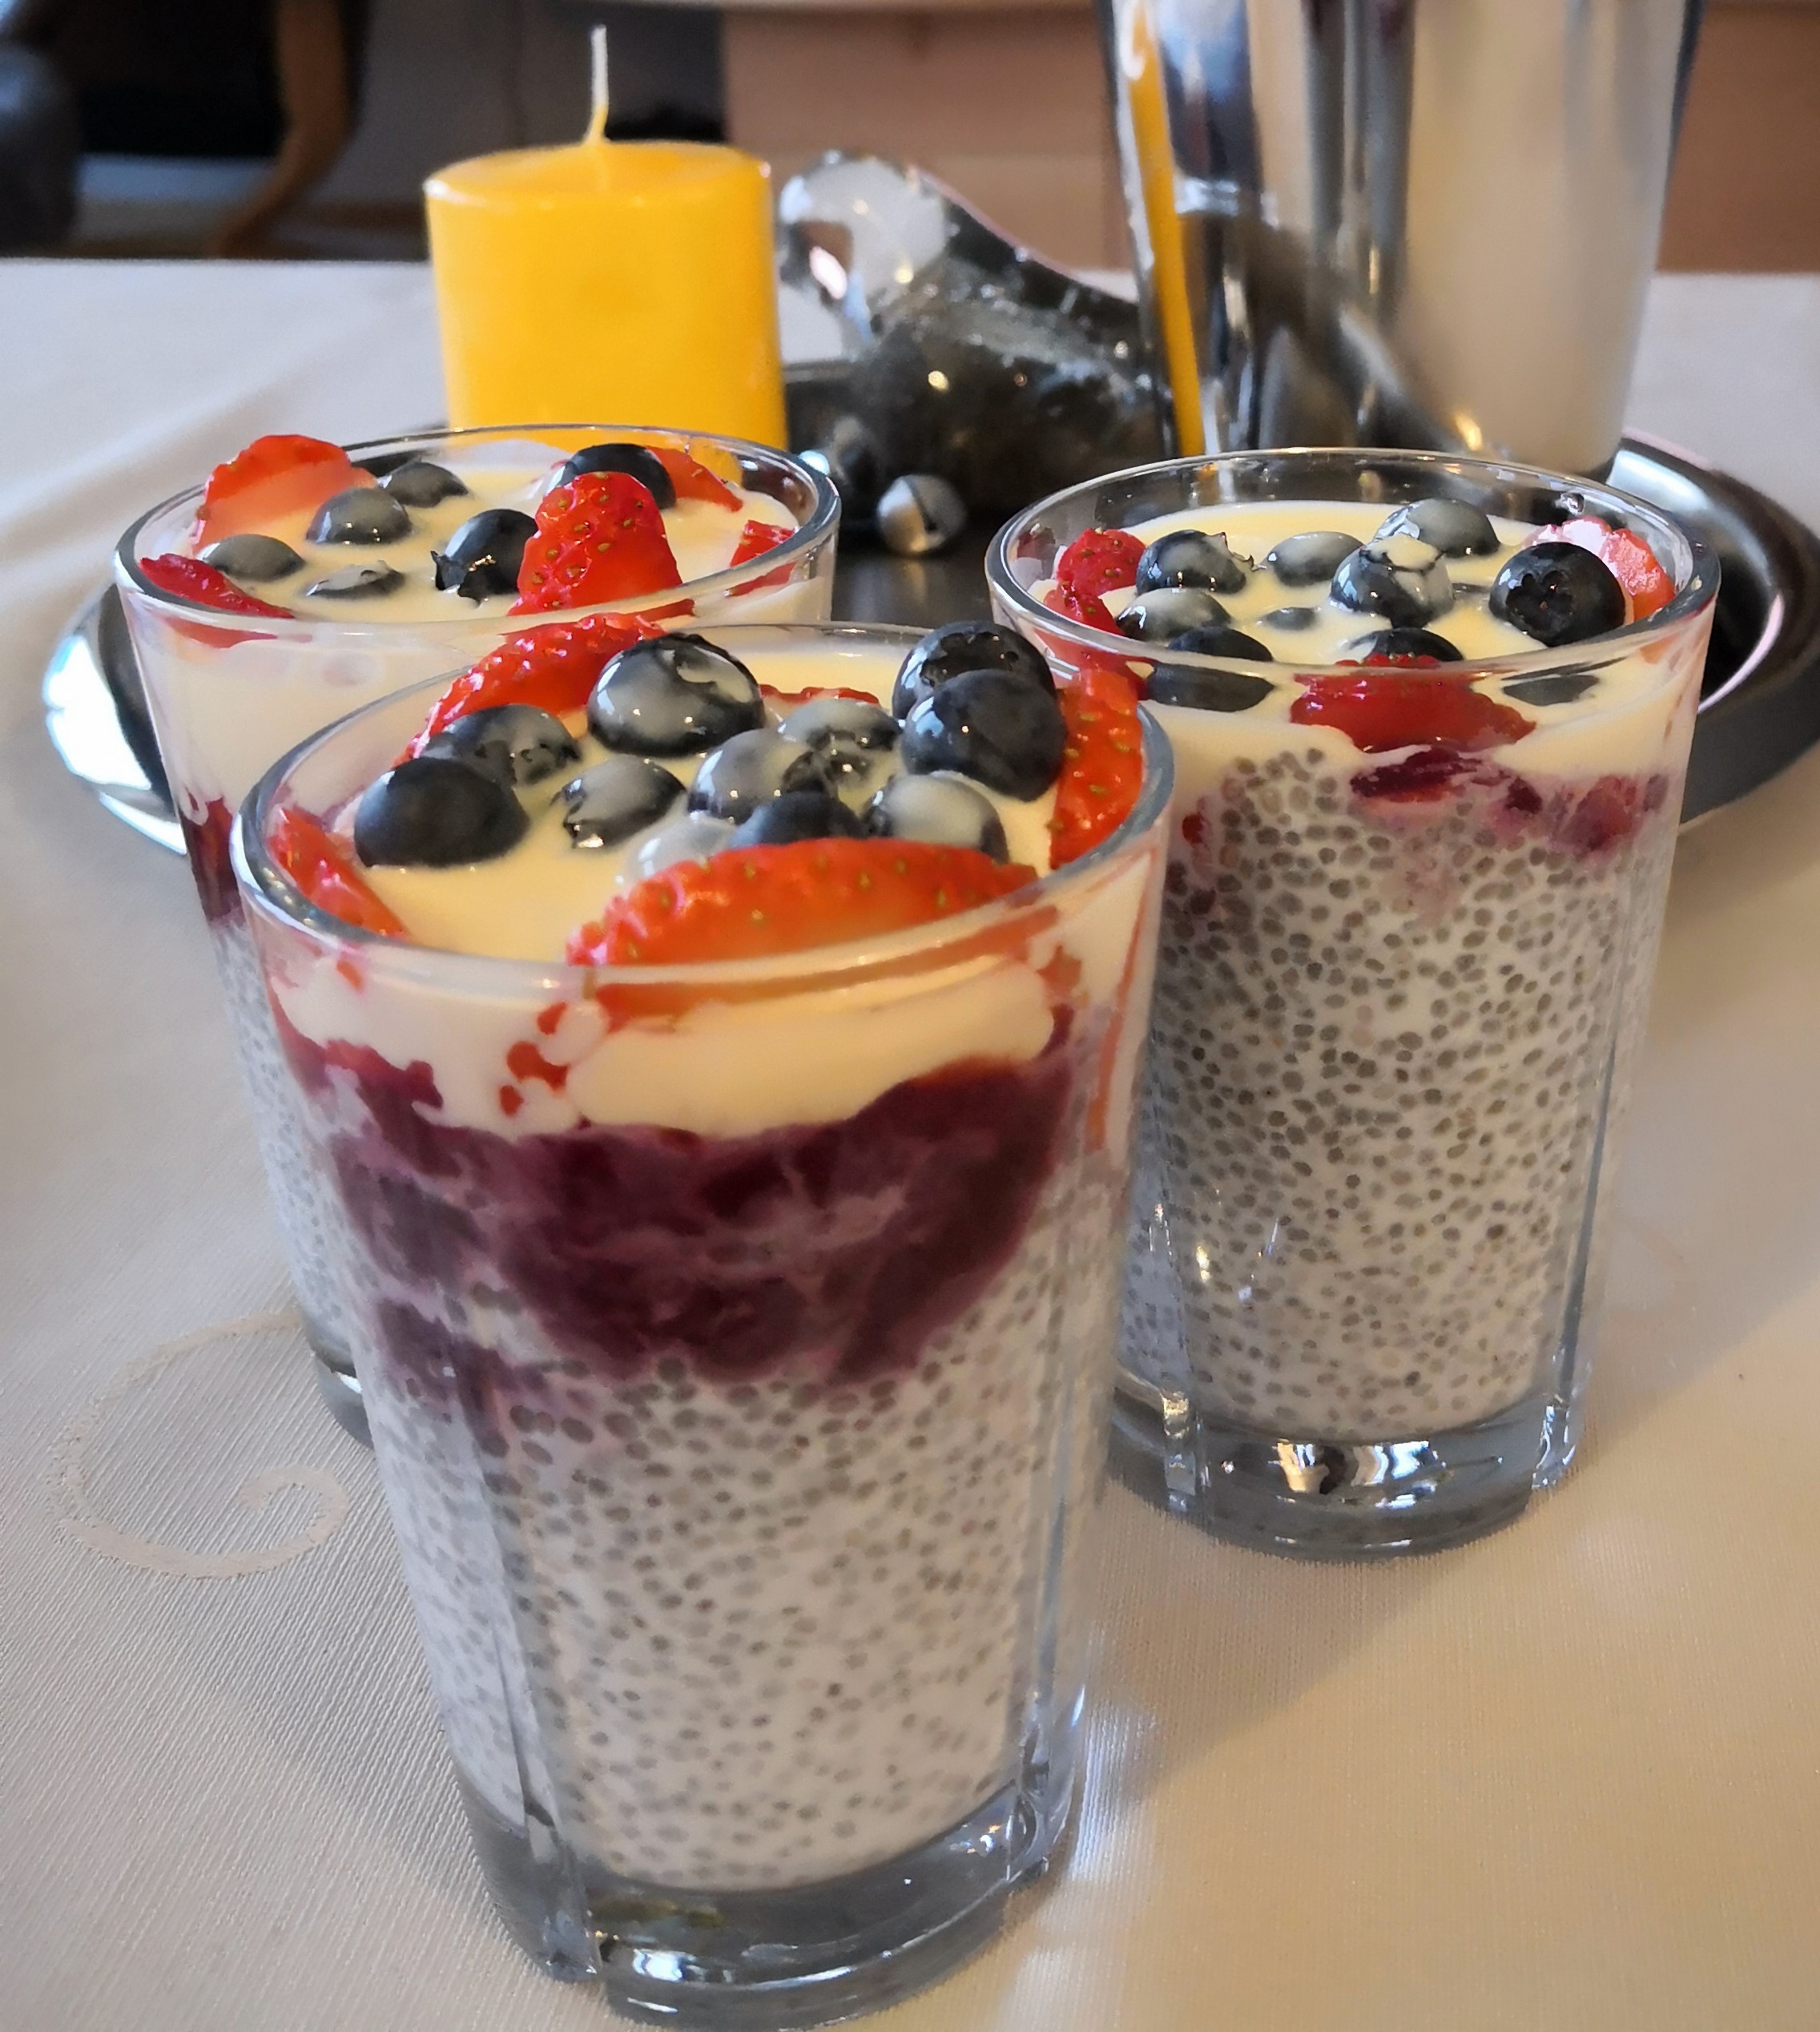 /sites/hexassets/Assets/recipes/my-best-healthy-recipe/chia-milk-pudding-final-sherry-chan.jpg